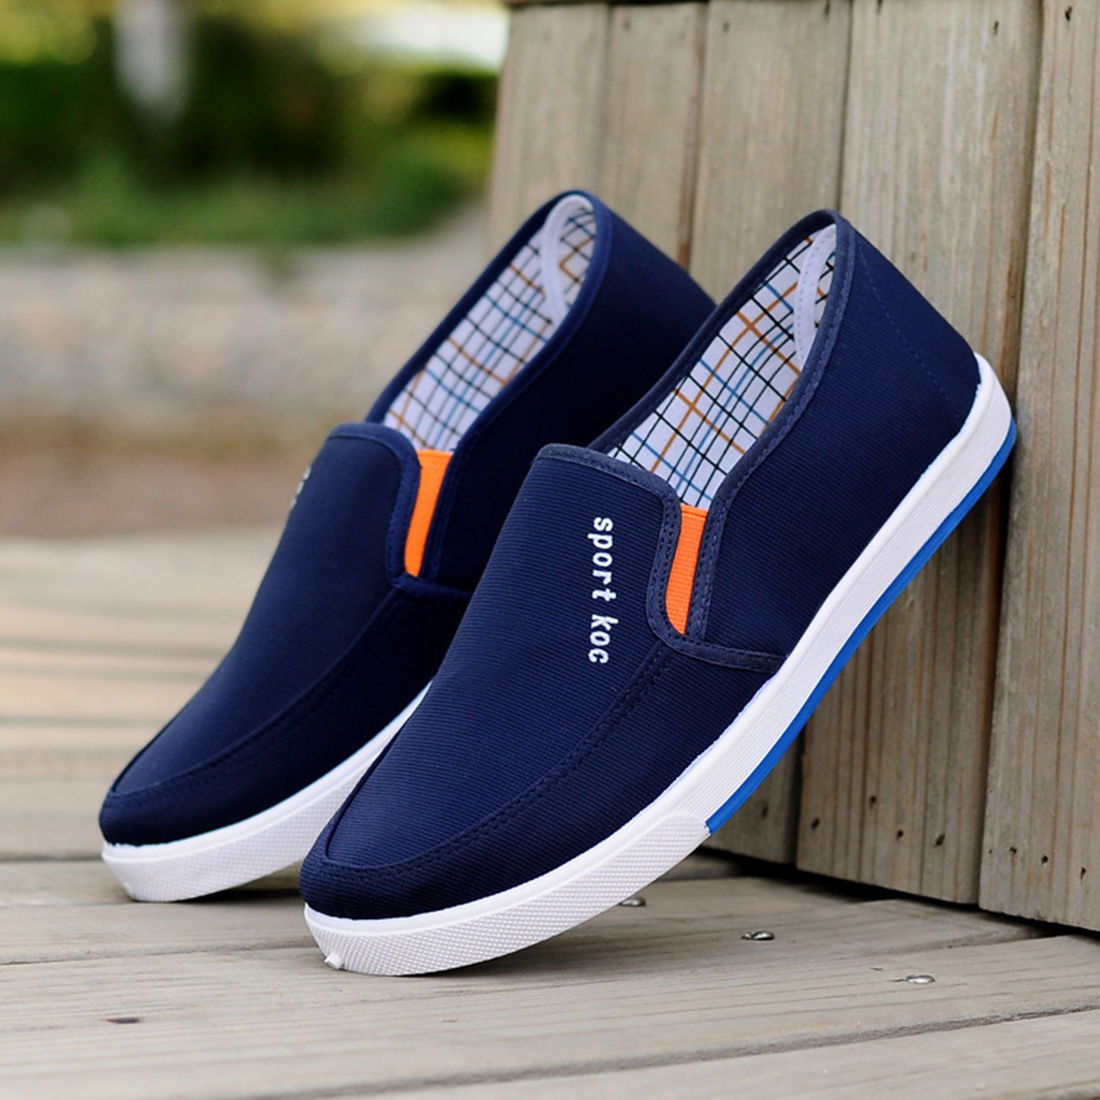 Men Canvas Casual Slip Resistant Sole Soft Walking Driving Loafers ...